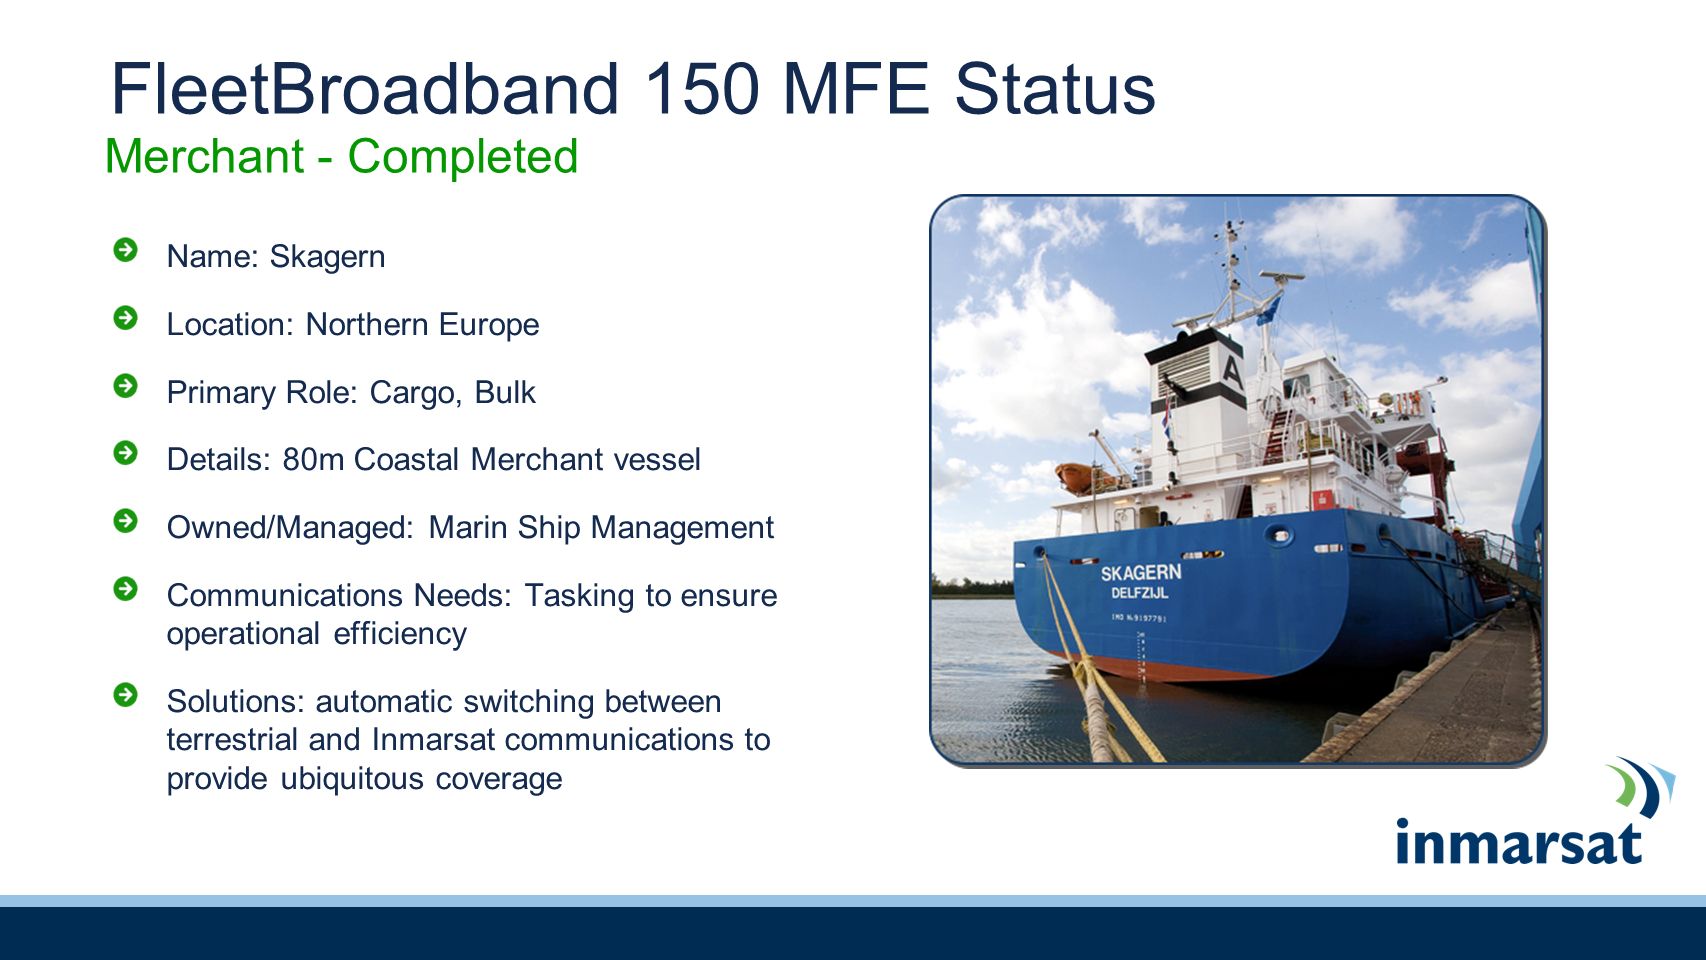 FleetBroadband 150 MFE Status Name: Skagern Location: Northern Europe Primary Role: Cargo, Bulk Details: 80m Coastal Merchant vessel Owned/Managed: Marin Ship Management Communications Needs: Tasking to ensure operational efficiency Solutions: automatic switching between terrestrial and Inmarsat communications to provide ubiquitous coverage Merchant - Completed